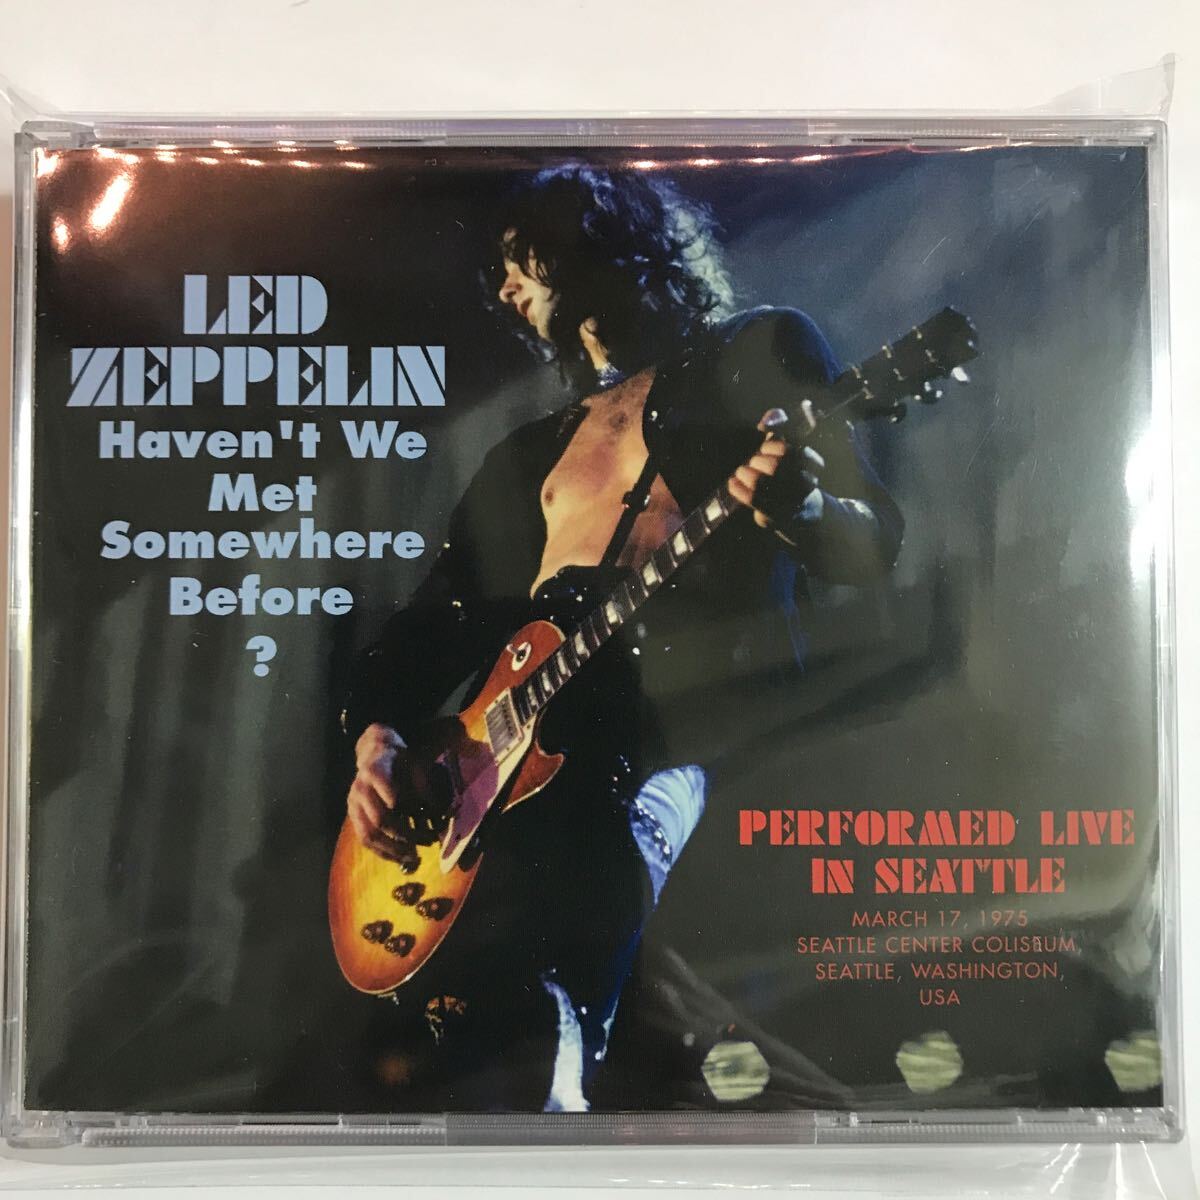 LED ZEPPELIN : Haven’t We Met Somewhere Before? Performed Live in Seattle (3CD) EVSDオリジナル！GW終わってしまった大特価！の画像1